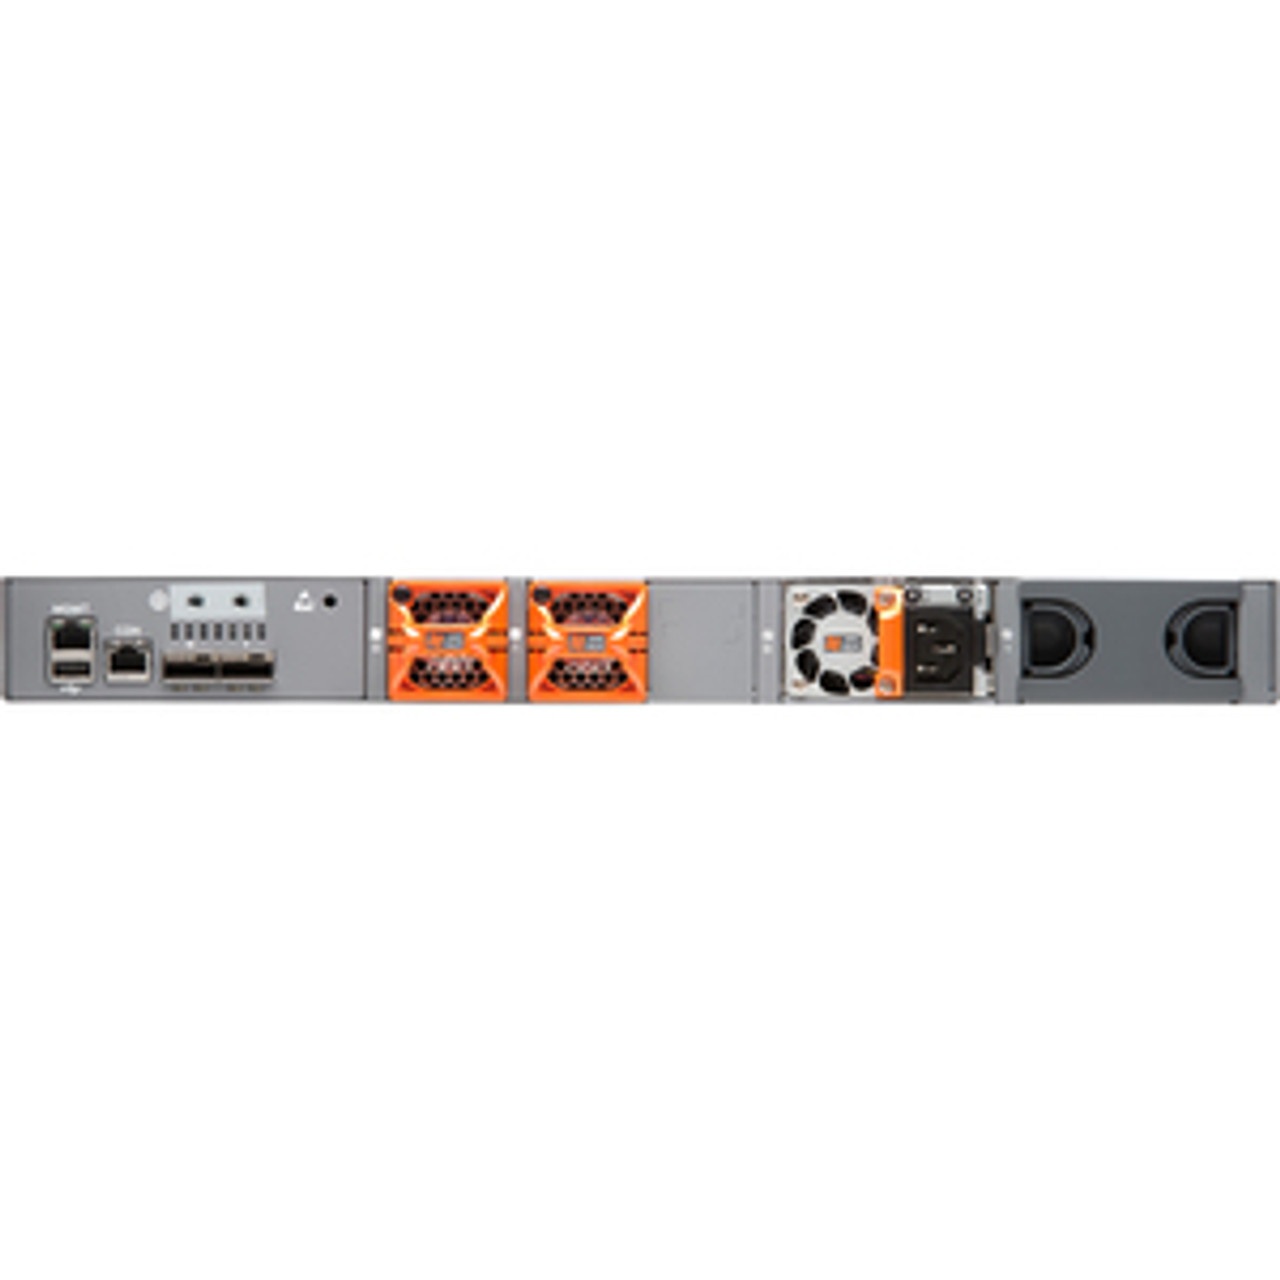 Juniper EX3400-24P Layer 3 Switch - 24 Ports - Manageable - Gigabit Ethernet - 40GBase-X - TAA Compliant - 3 Layer Supported - Modular - Optical Fiber, Twisted Pair - 1U High - Rack-mountable, Wall Mountable - EX3400-24P-TAA